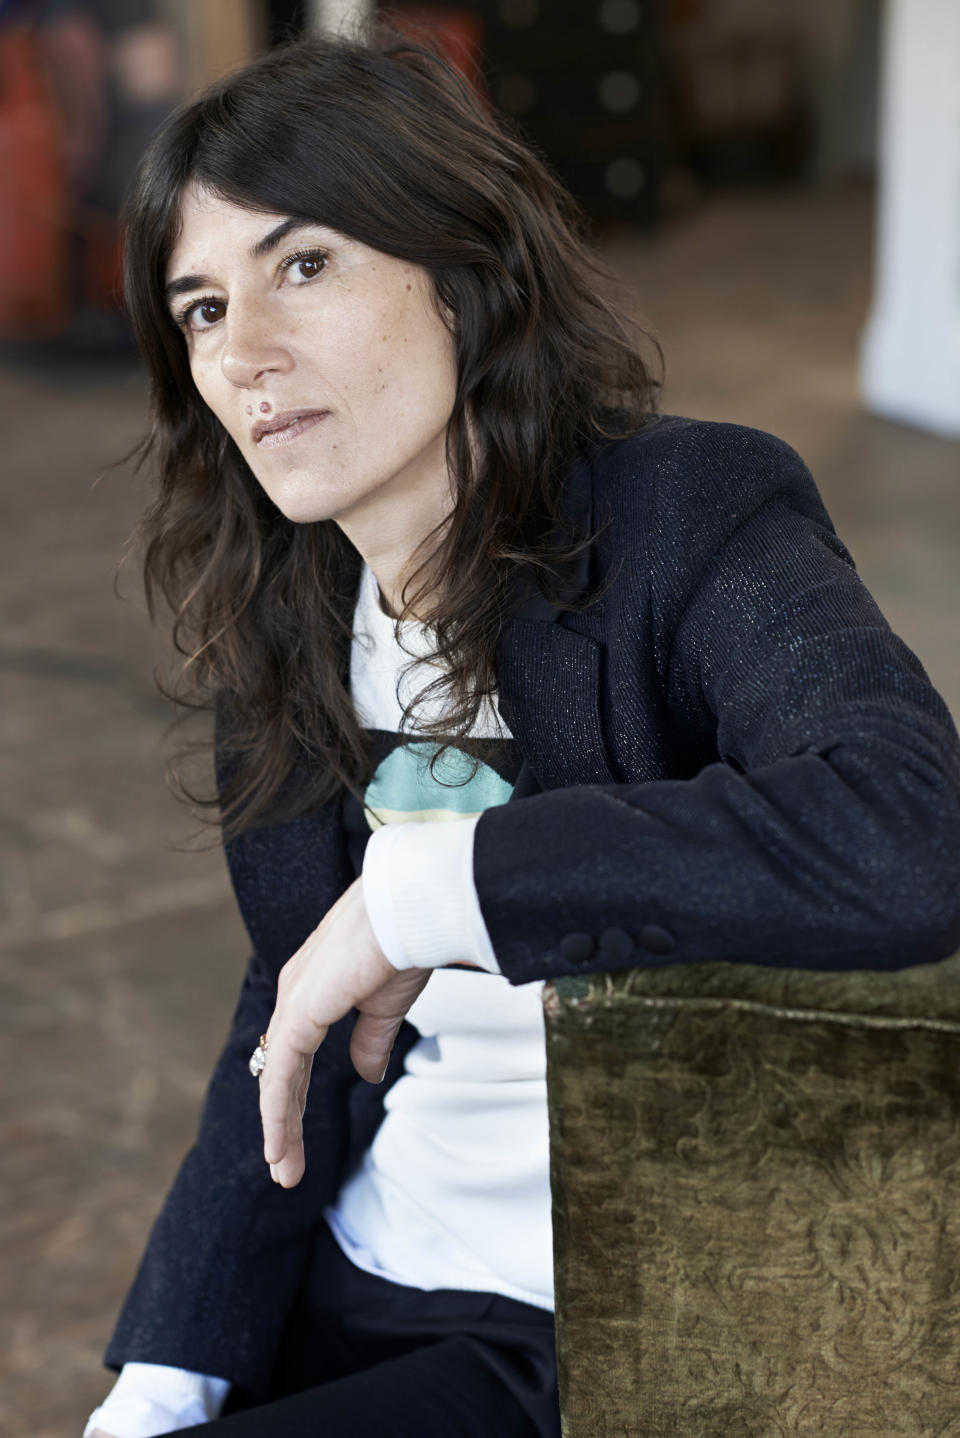 Designer Bella Freud is one of the confirmed speakers at the event